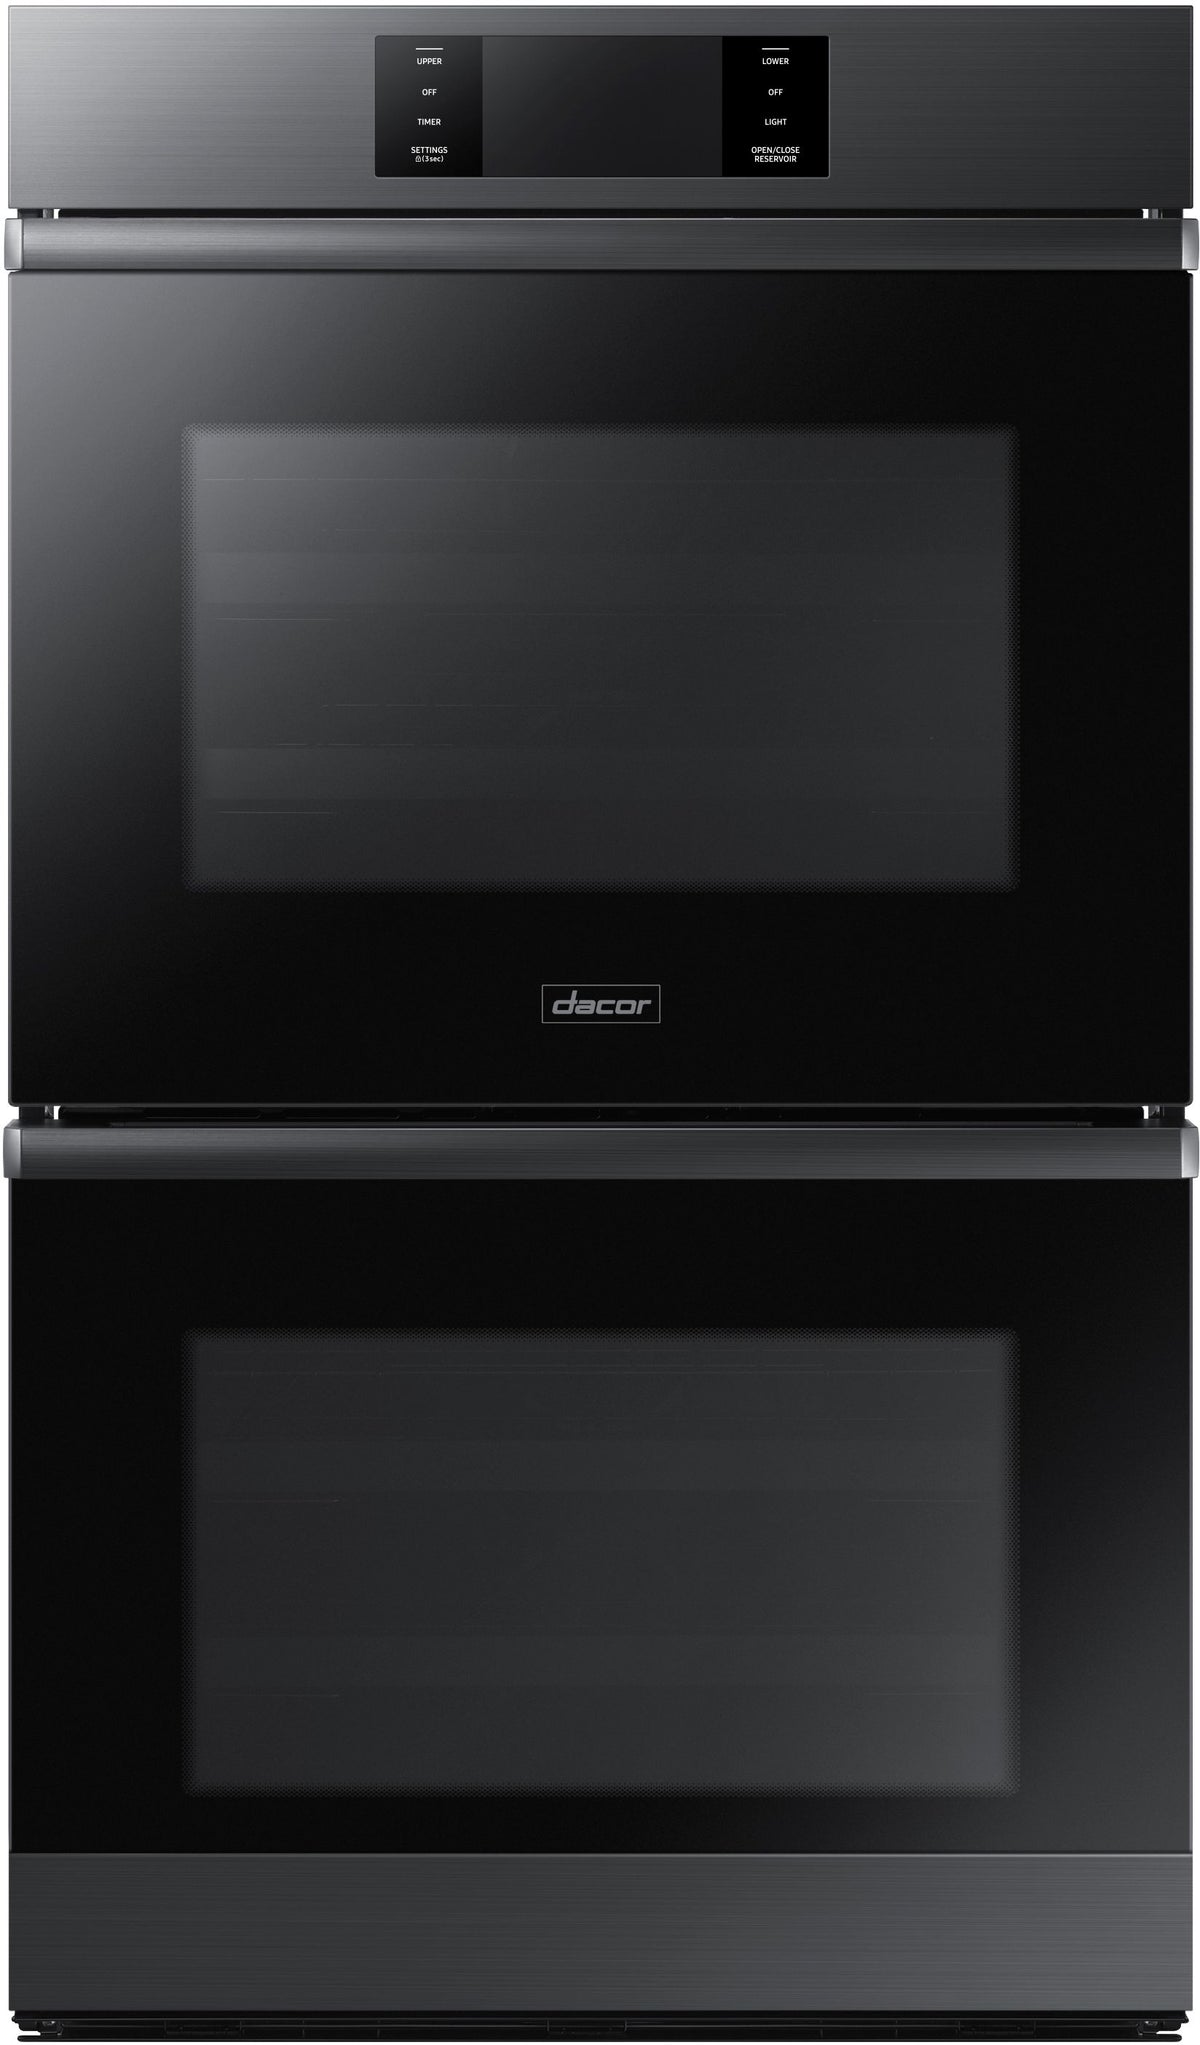 Dacor® Contemporary 30" Graphite Stainless Steel Electric Double Wall Oven